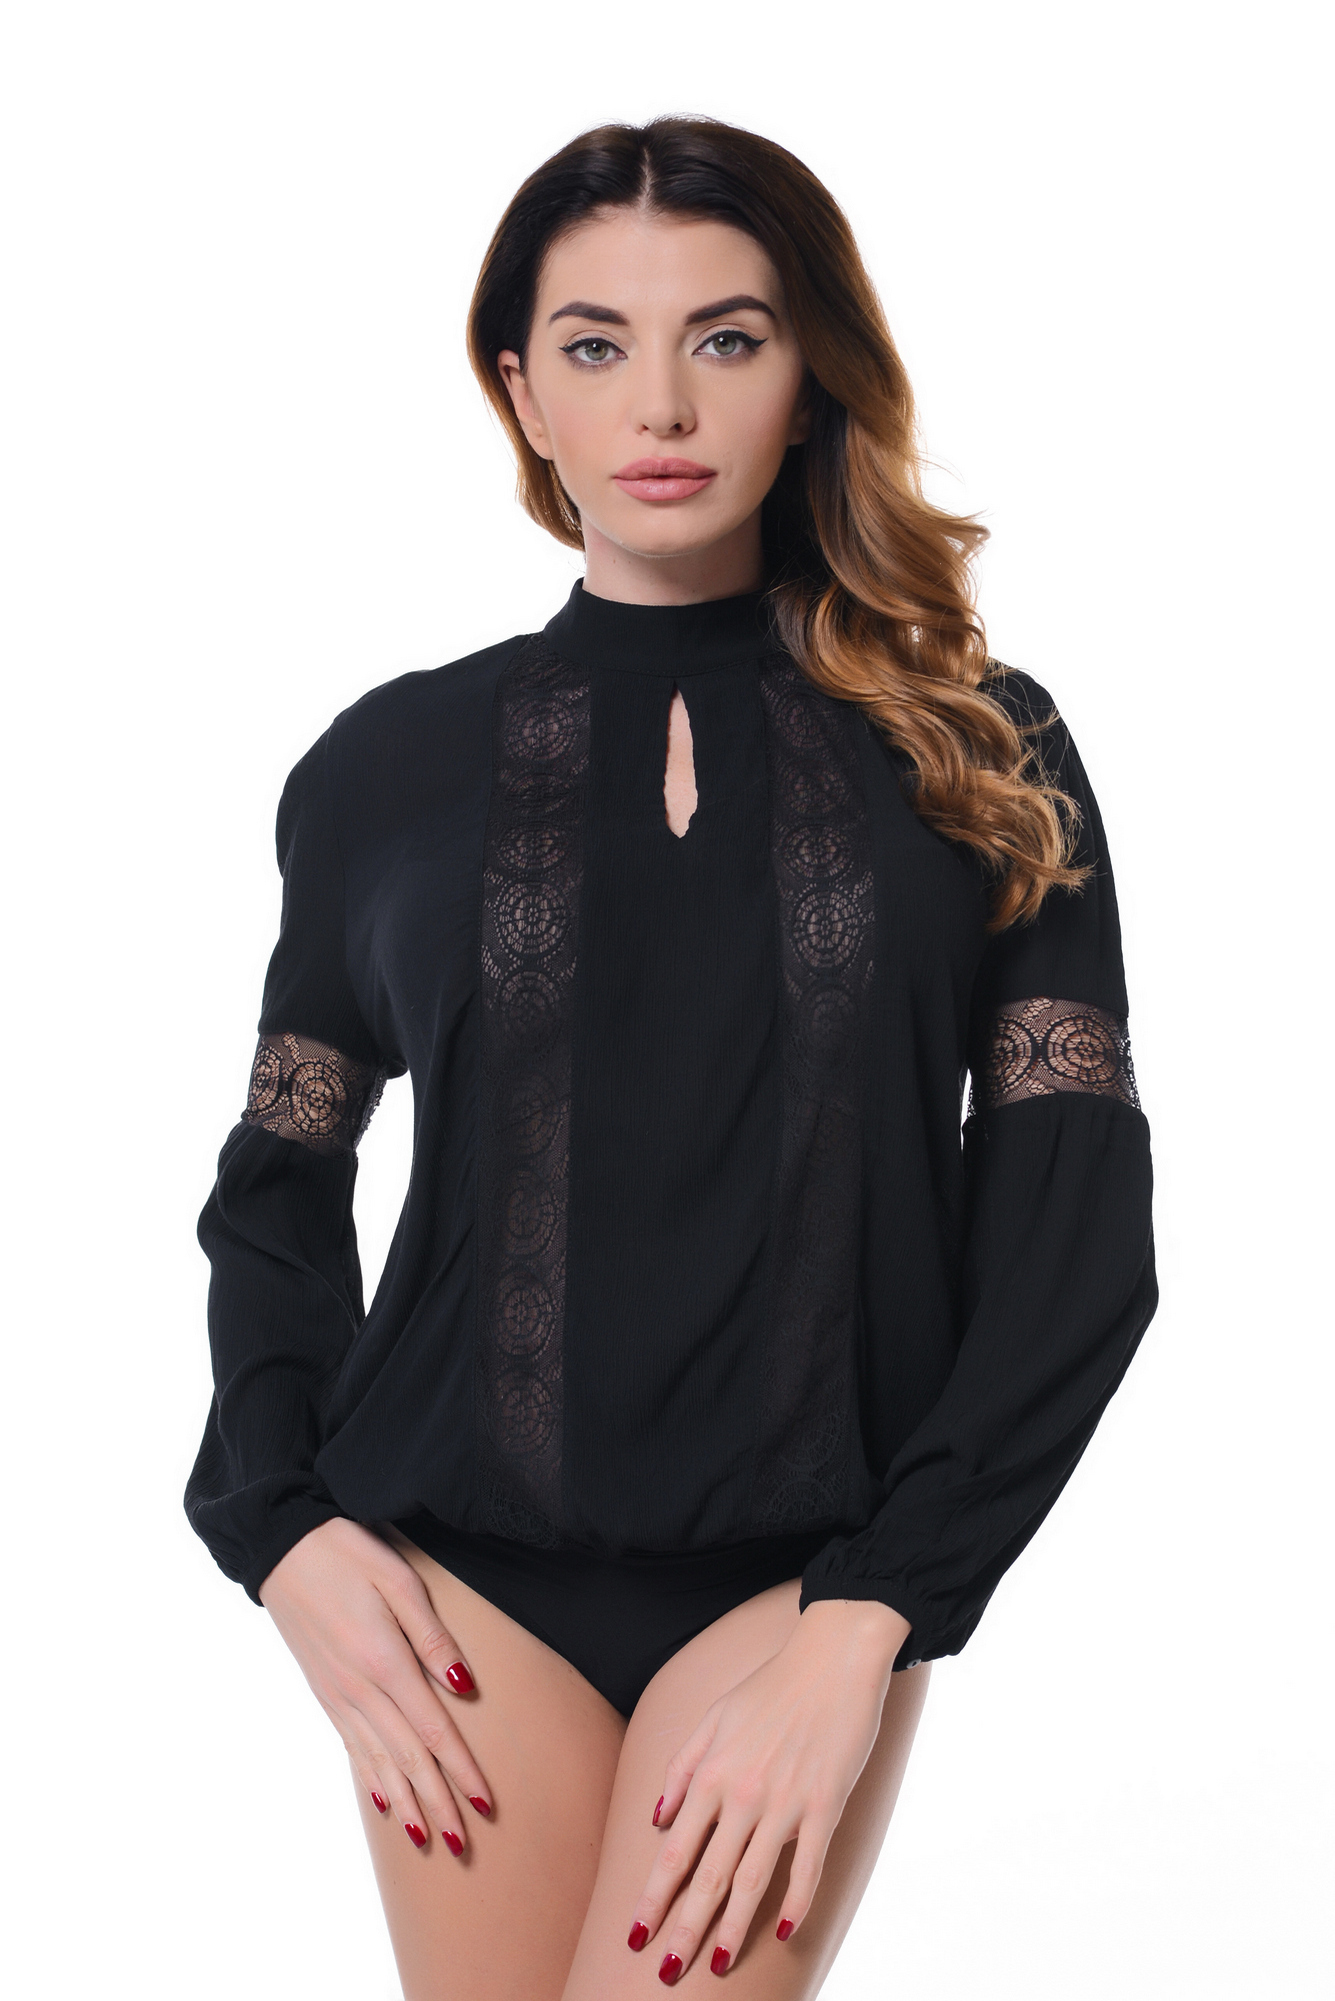 Buy Black Women Blouse Body Lace Guipure Office Style Clothing by Arefeva